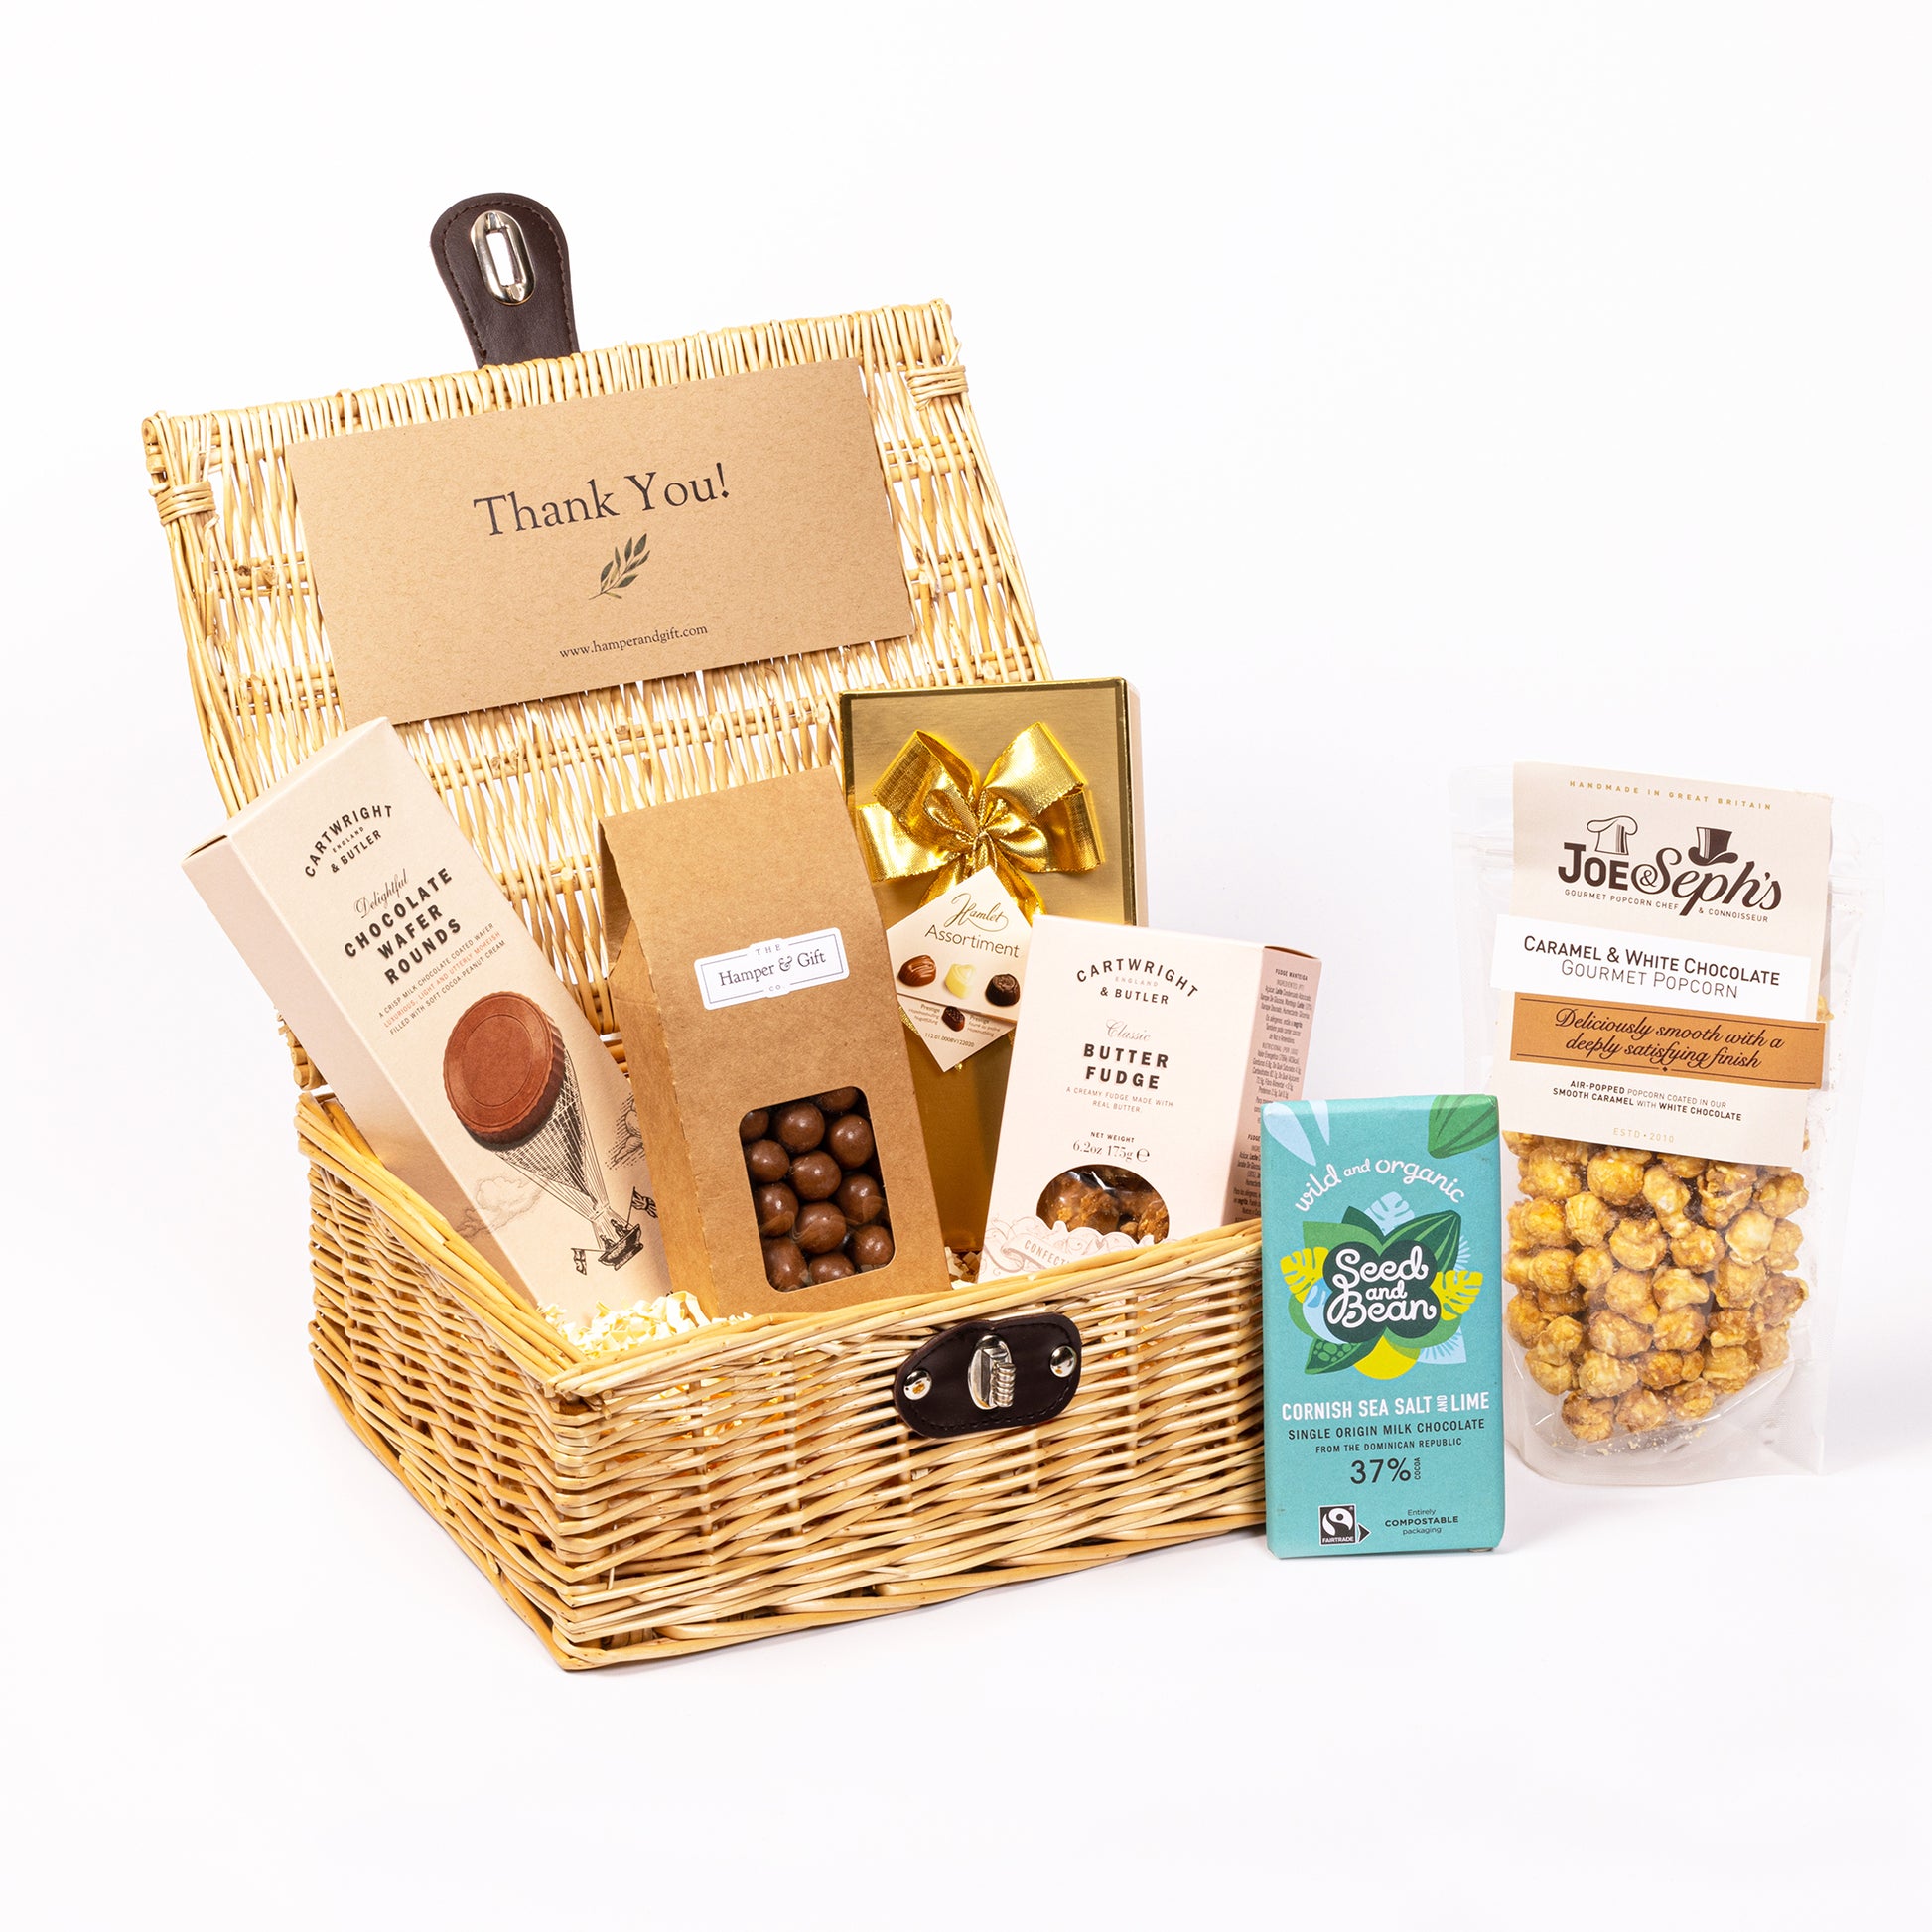 Thank You Chocolate & Fudge Hamper filled with a variety of chocolate, fudge, biscuit and gourmet popcorn